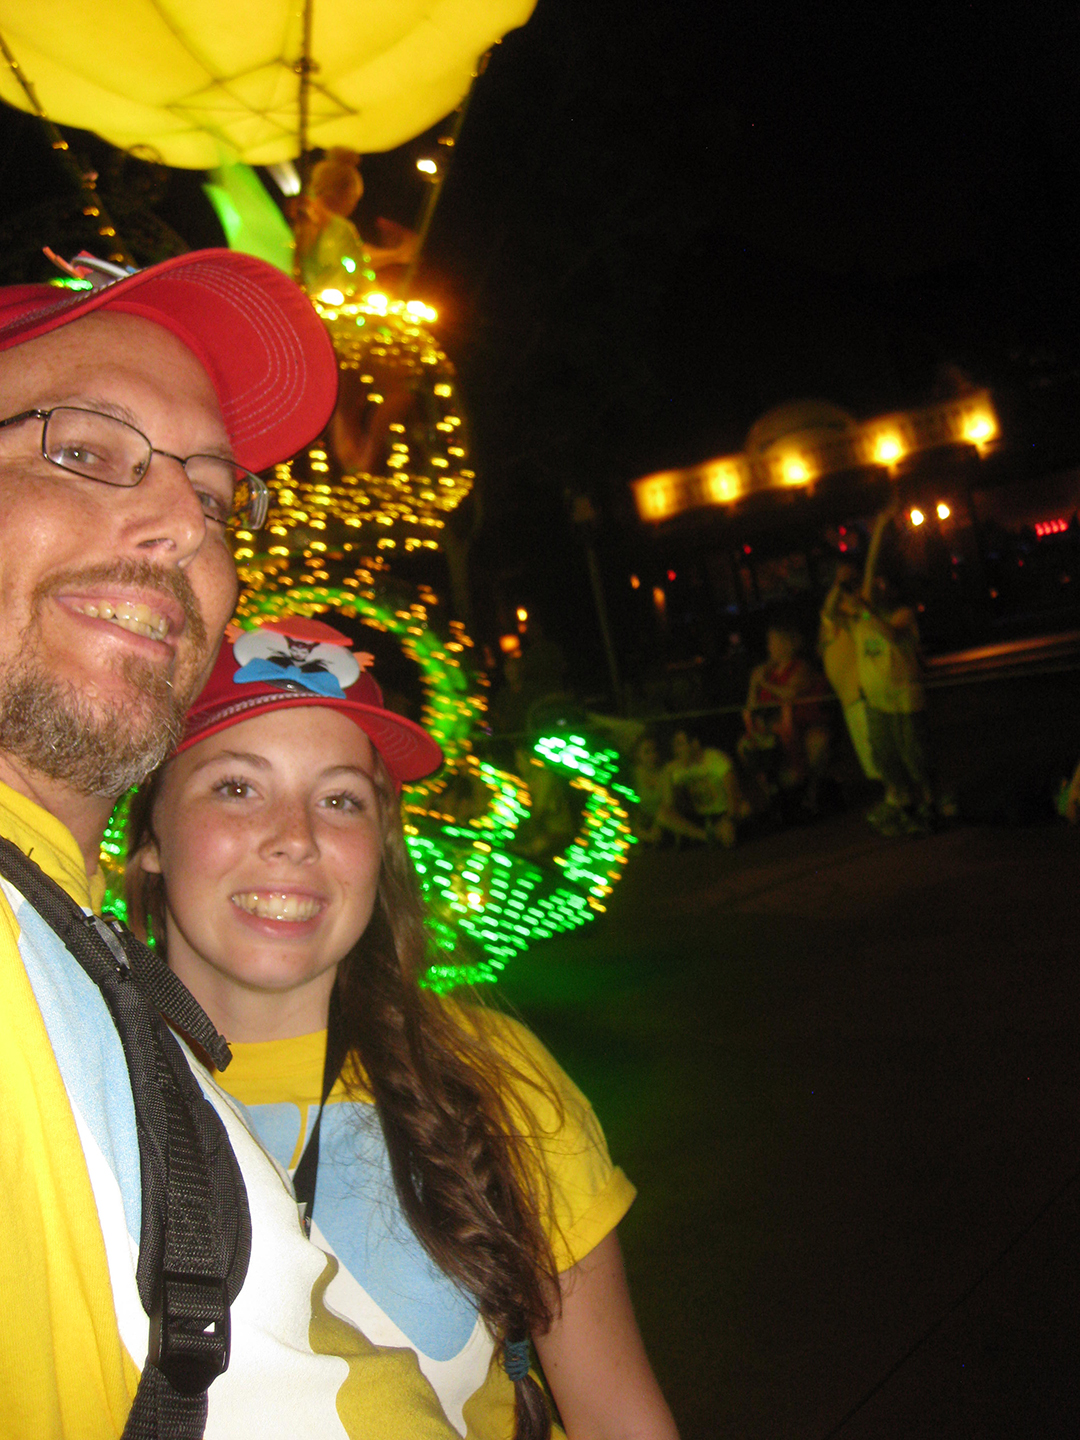 79 Main St Electrical Parade (1)